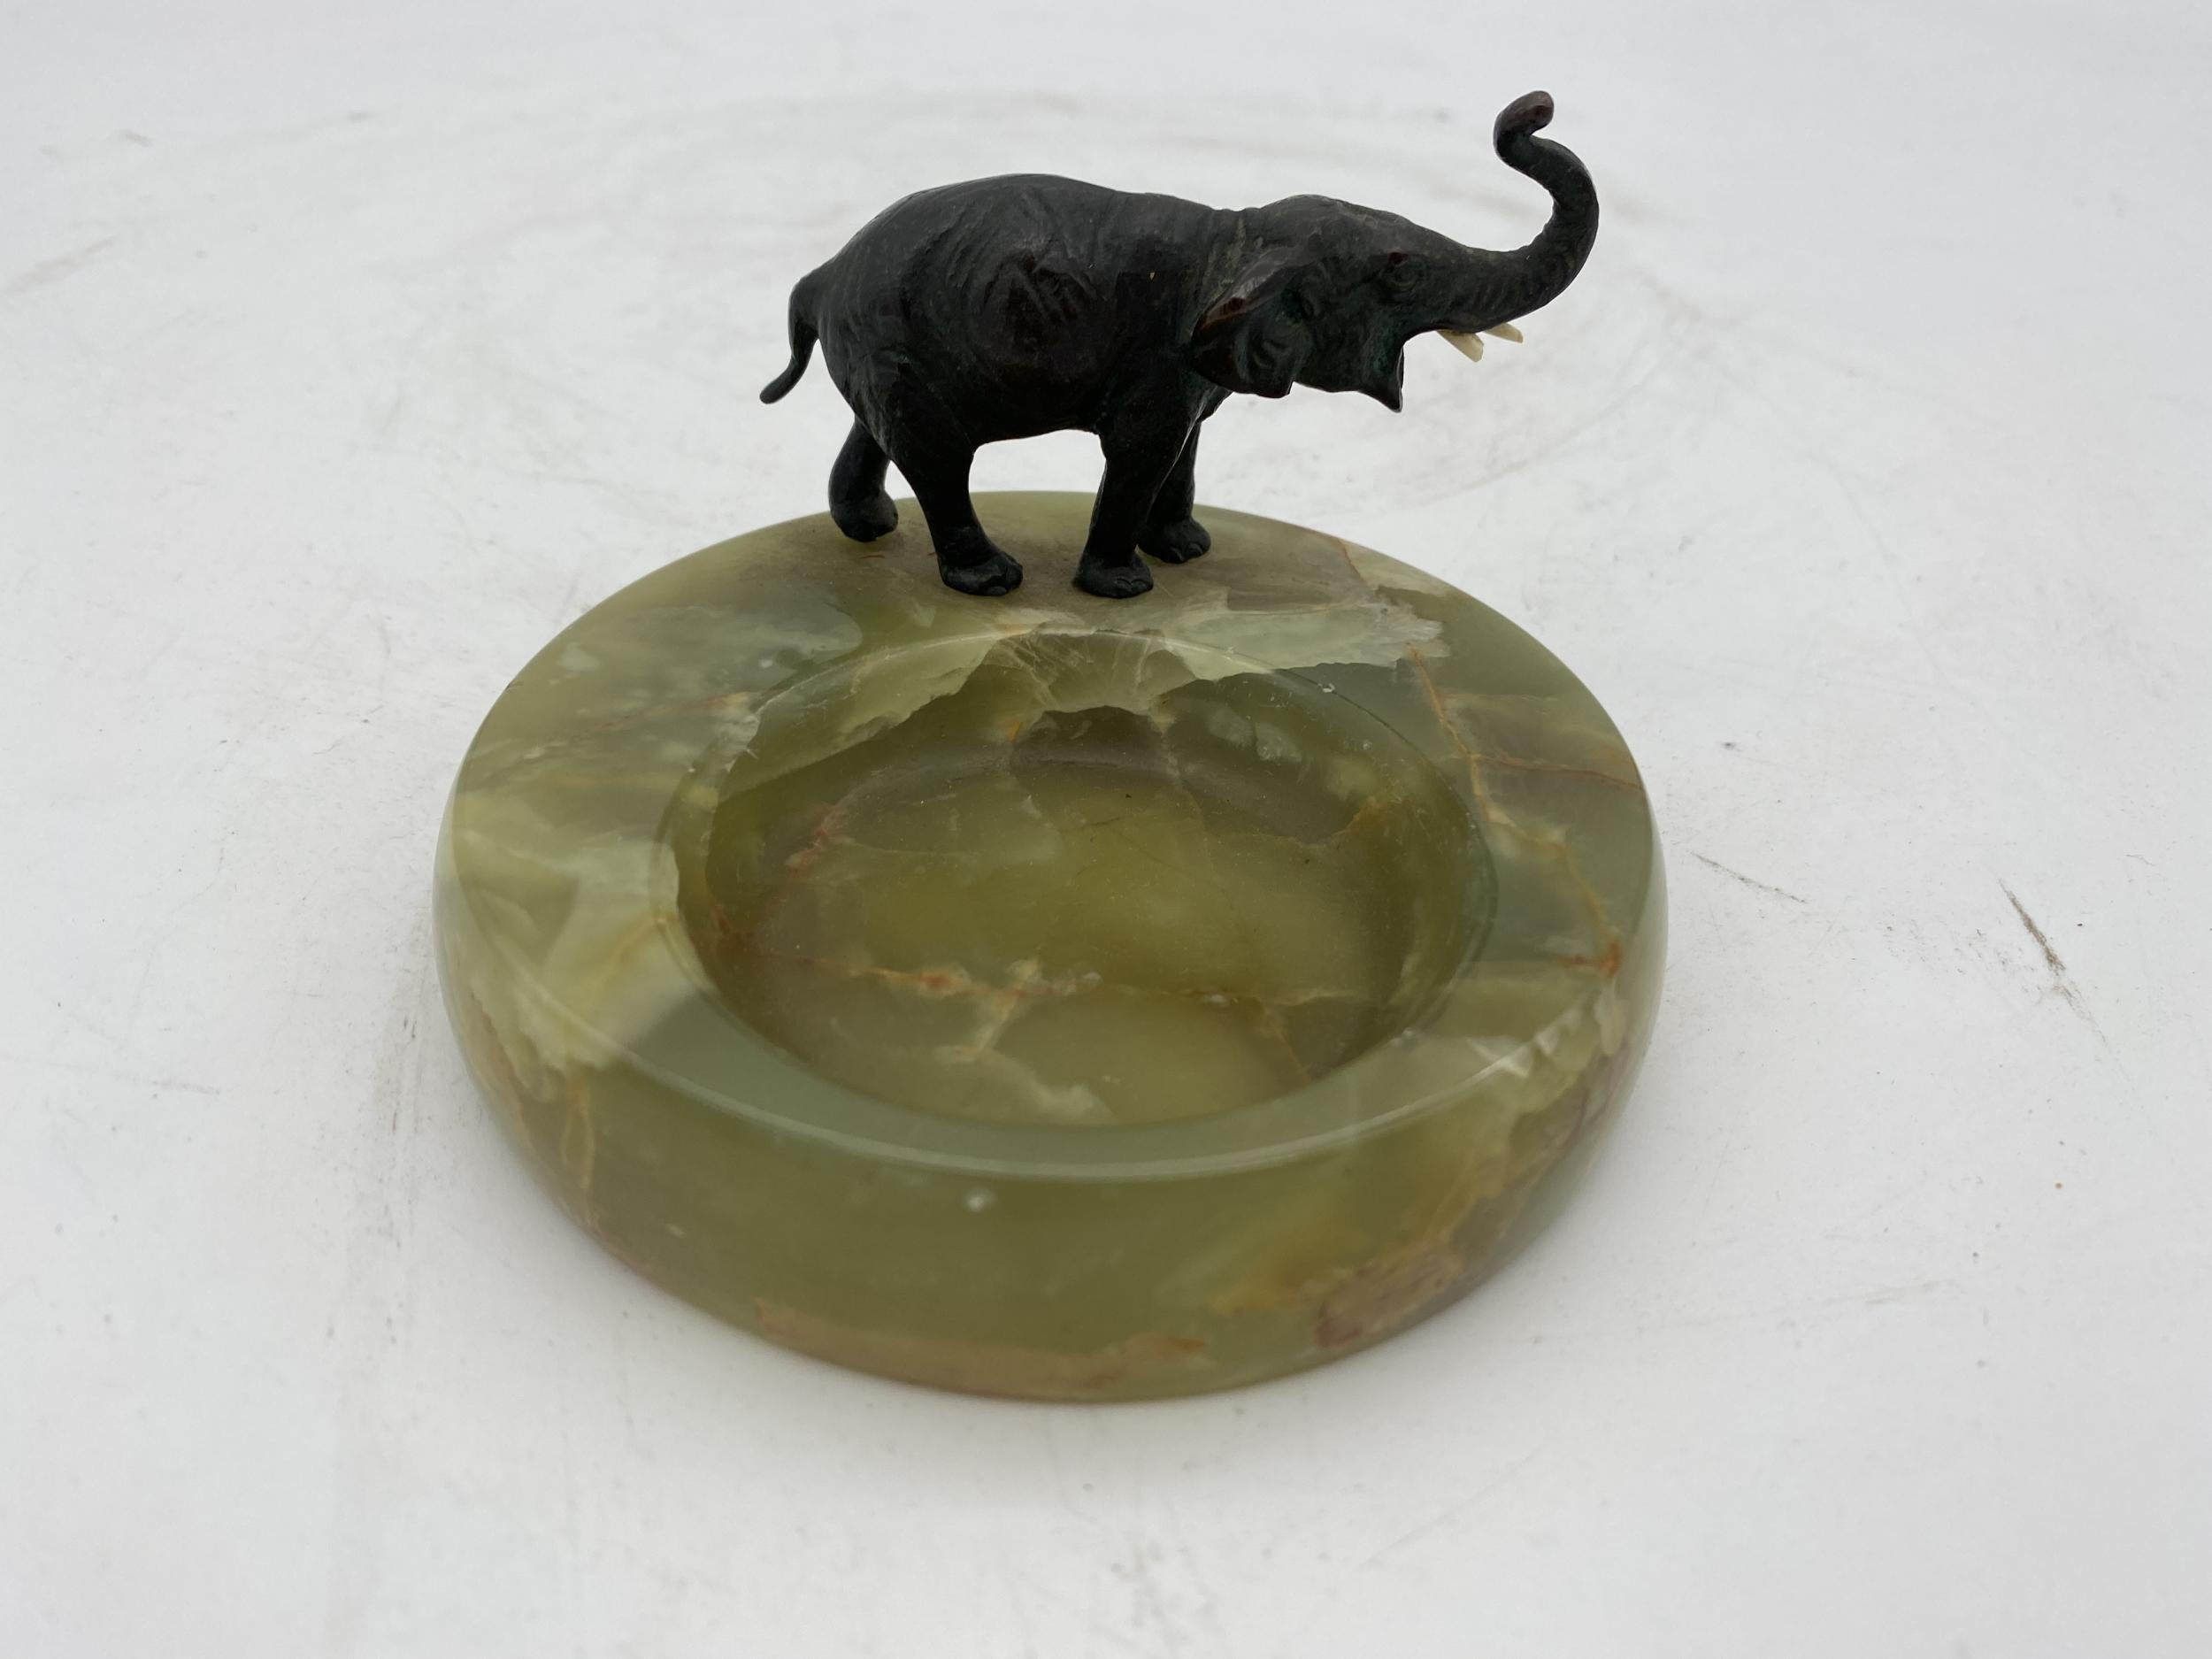 Original green Marble ashtray features a bronze metal sculpture of elephant. This is a great example of early Art Deco design and is reminiscent of the design and quality found in Frankart and Nuart sculptures.

This tray comes unused and could be